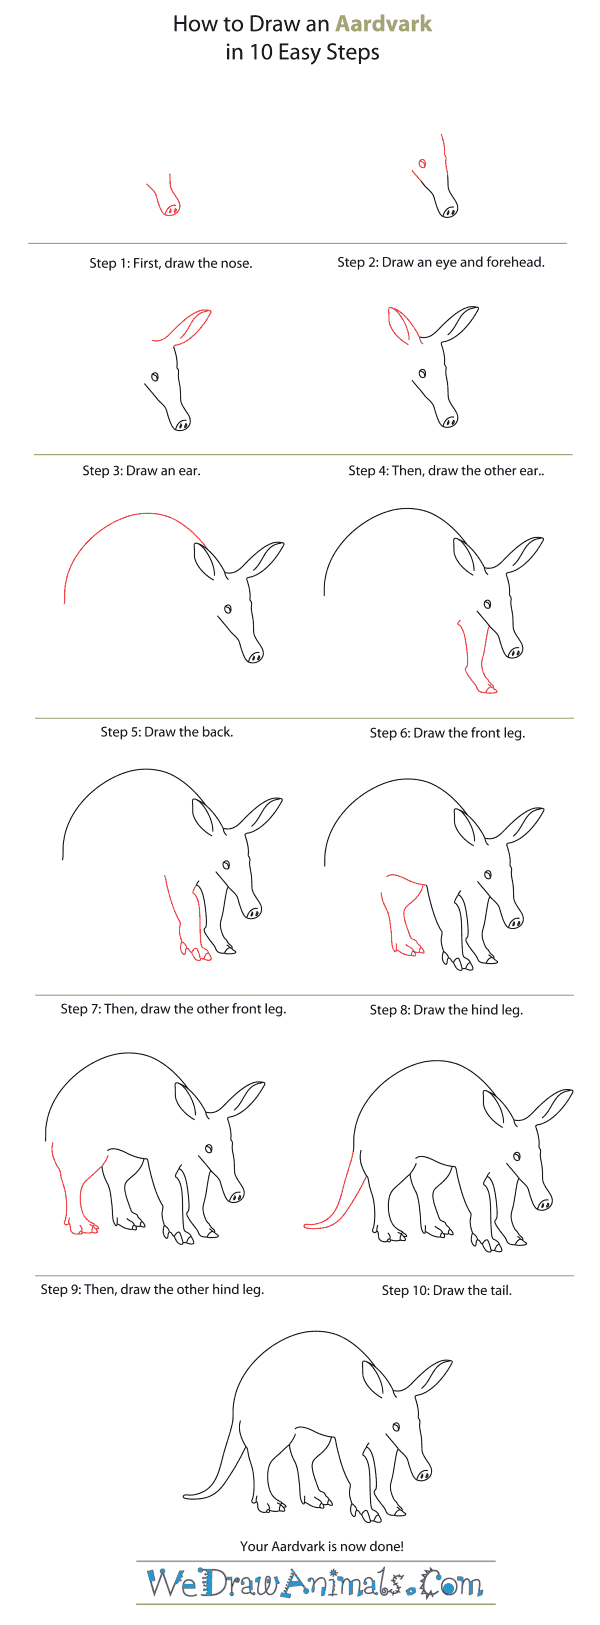 How to Draw an Aardvark - Step-By-Step Tutorial